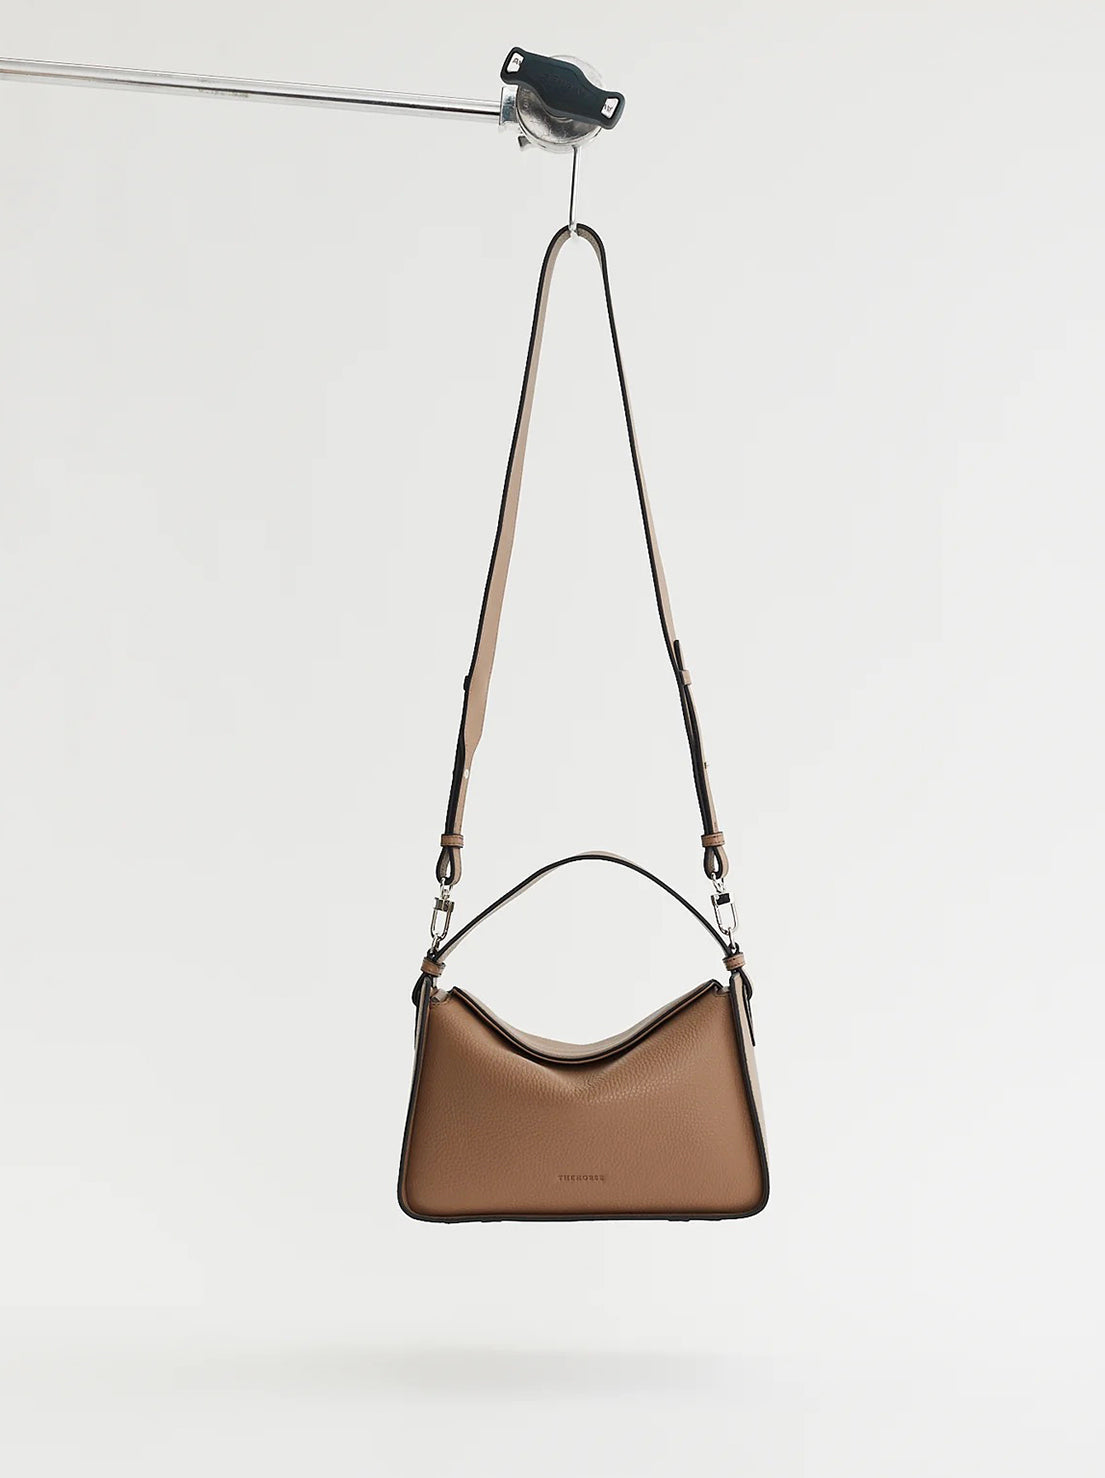 The Horse - Clementine Bag - Taupe